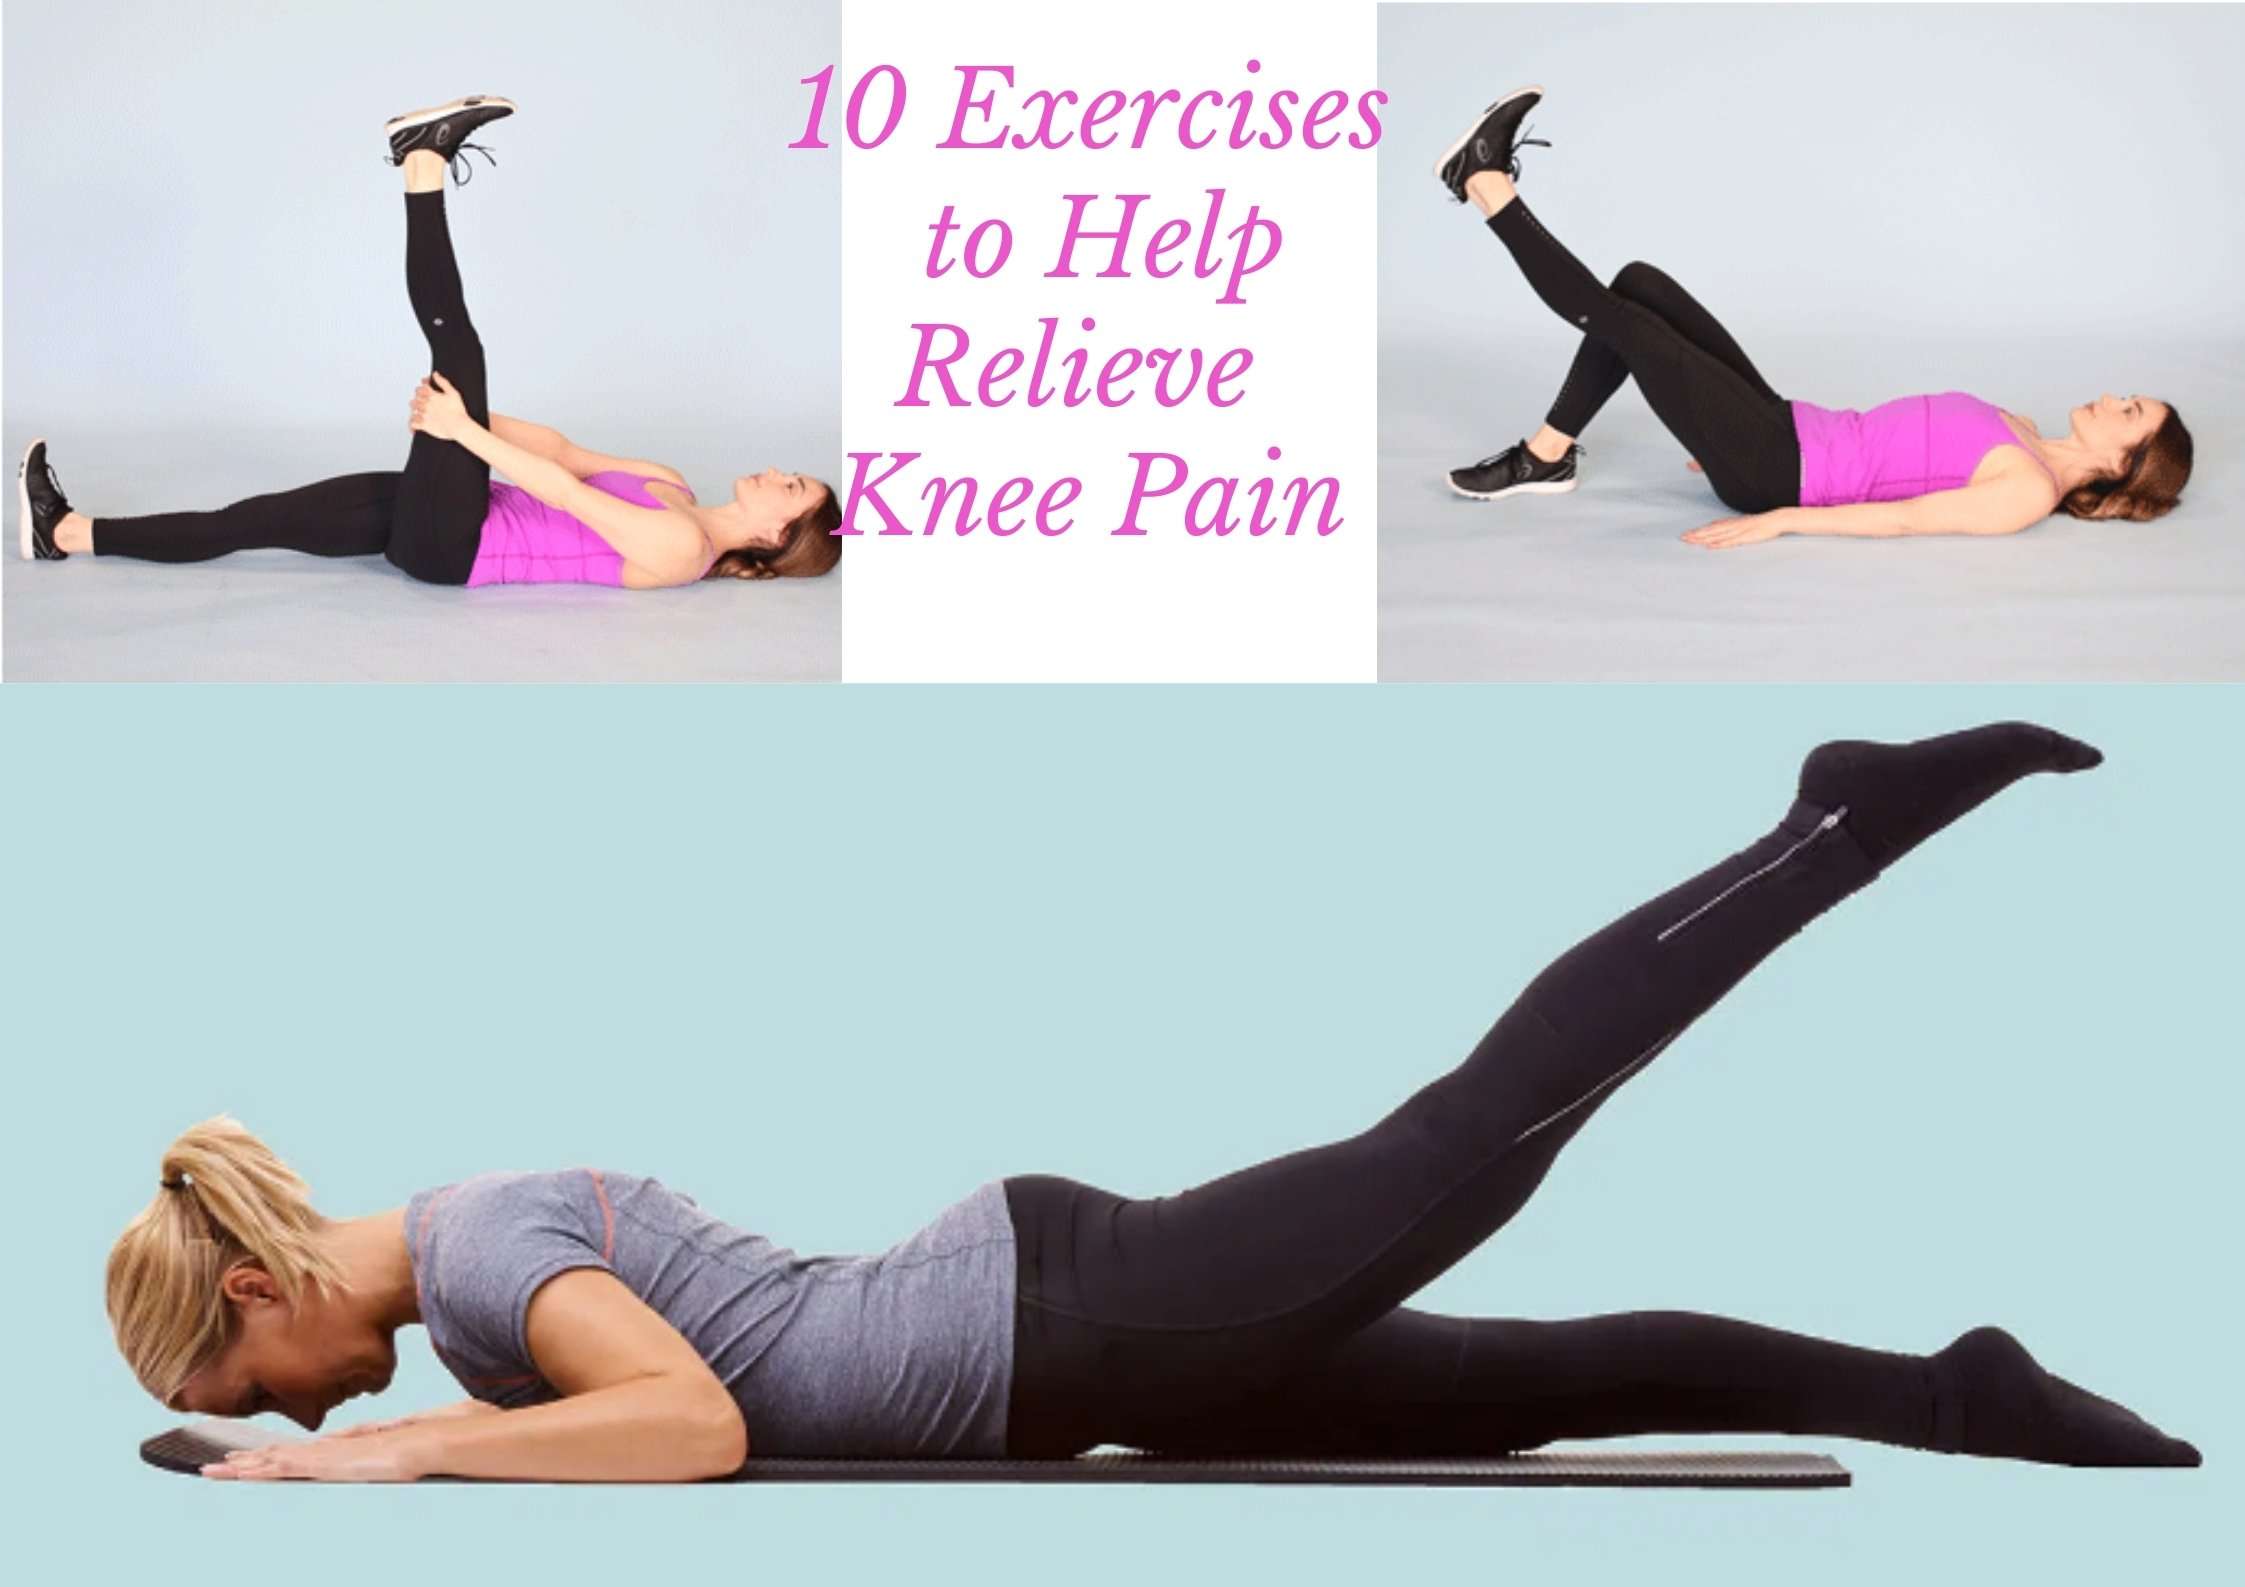 10 Exercises to Help Relieve Knee Pain